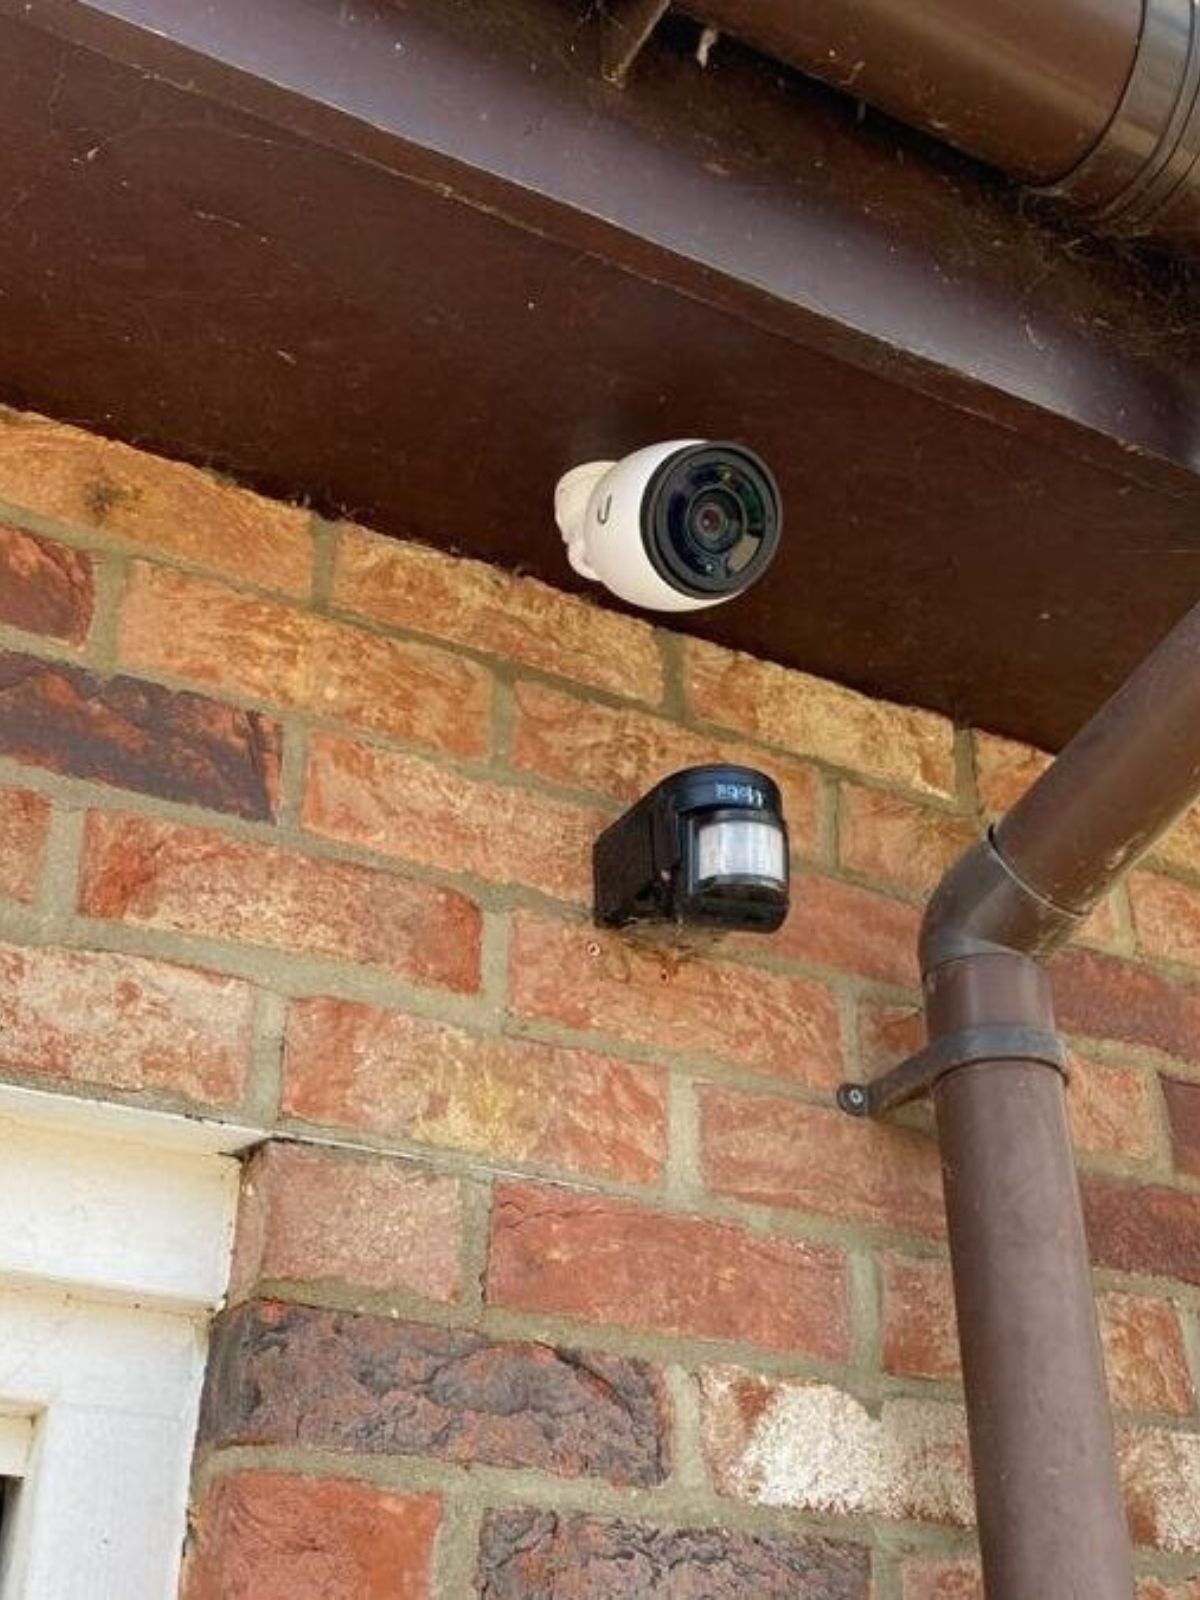 UniFi security camera mounted on the side of a brick house pointing downwards